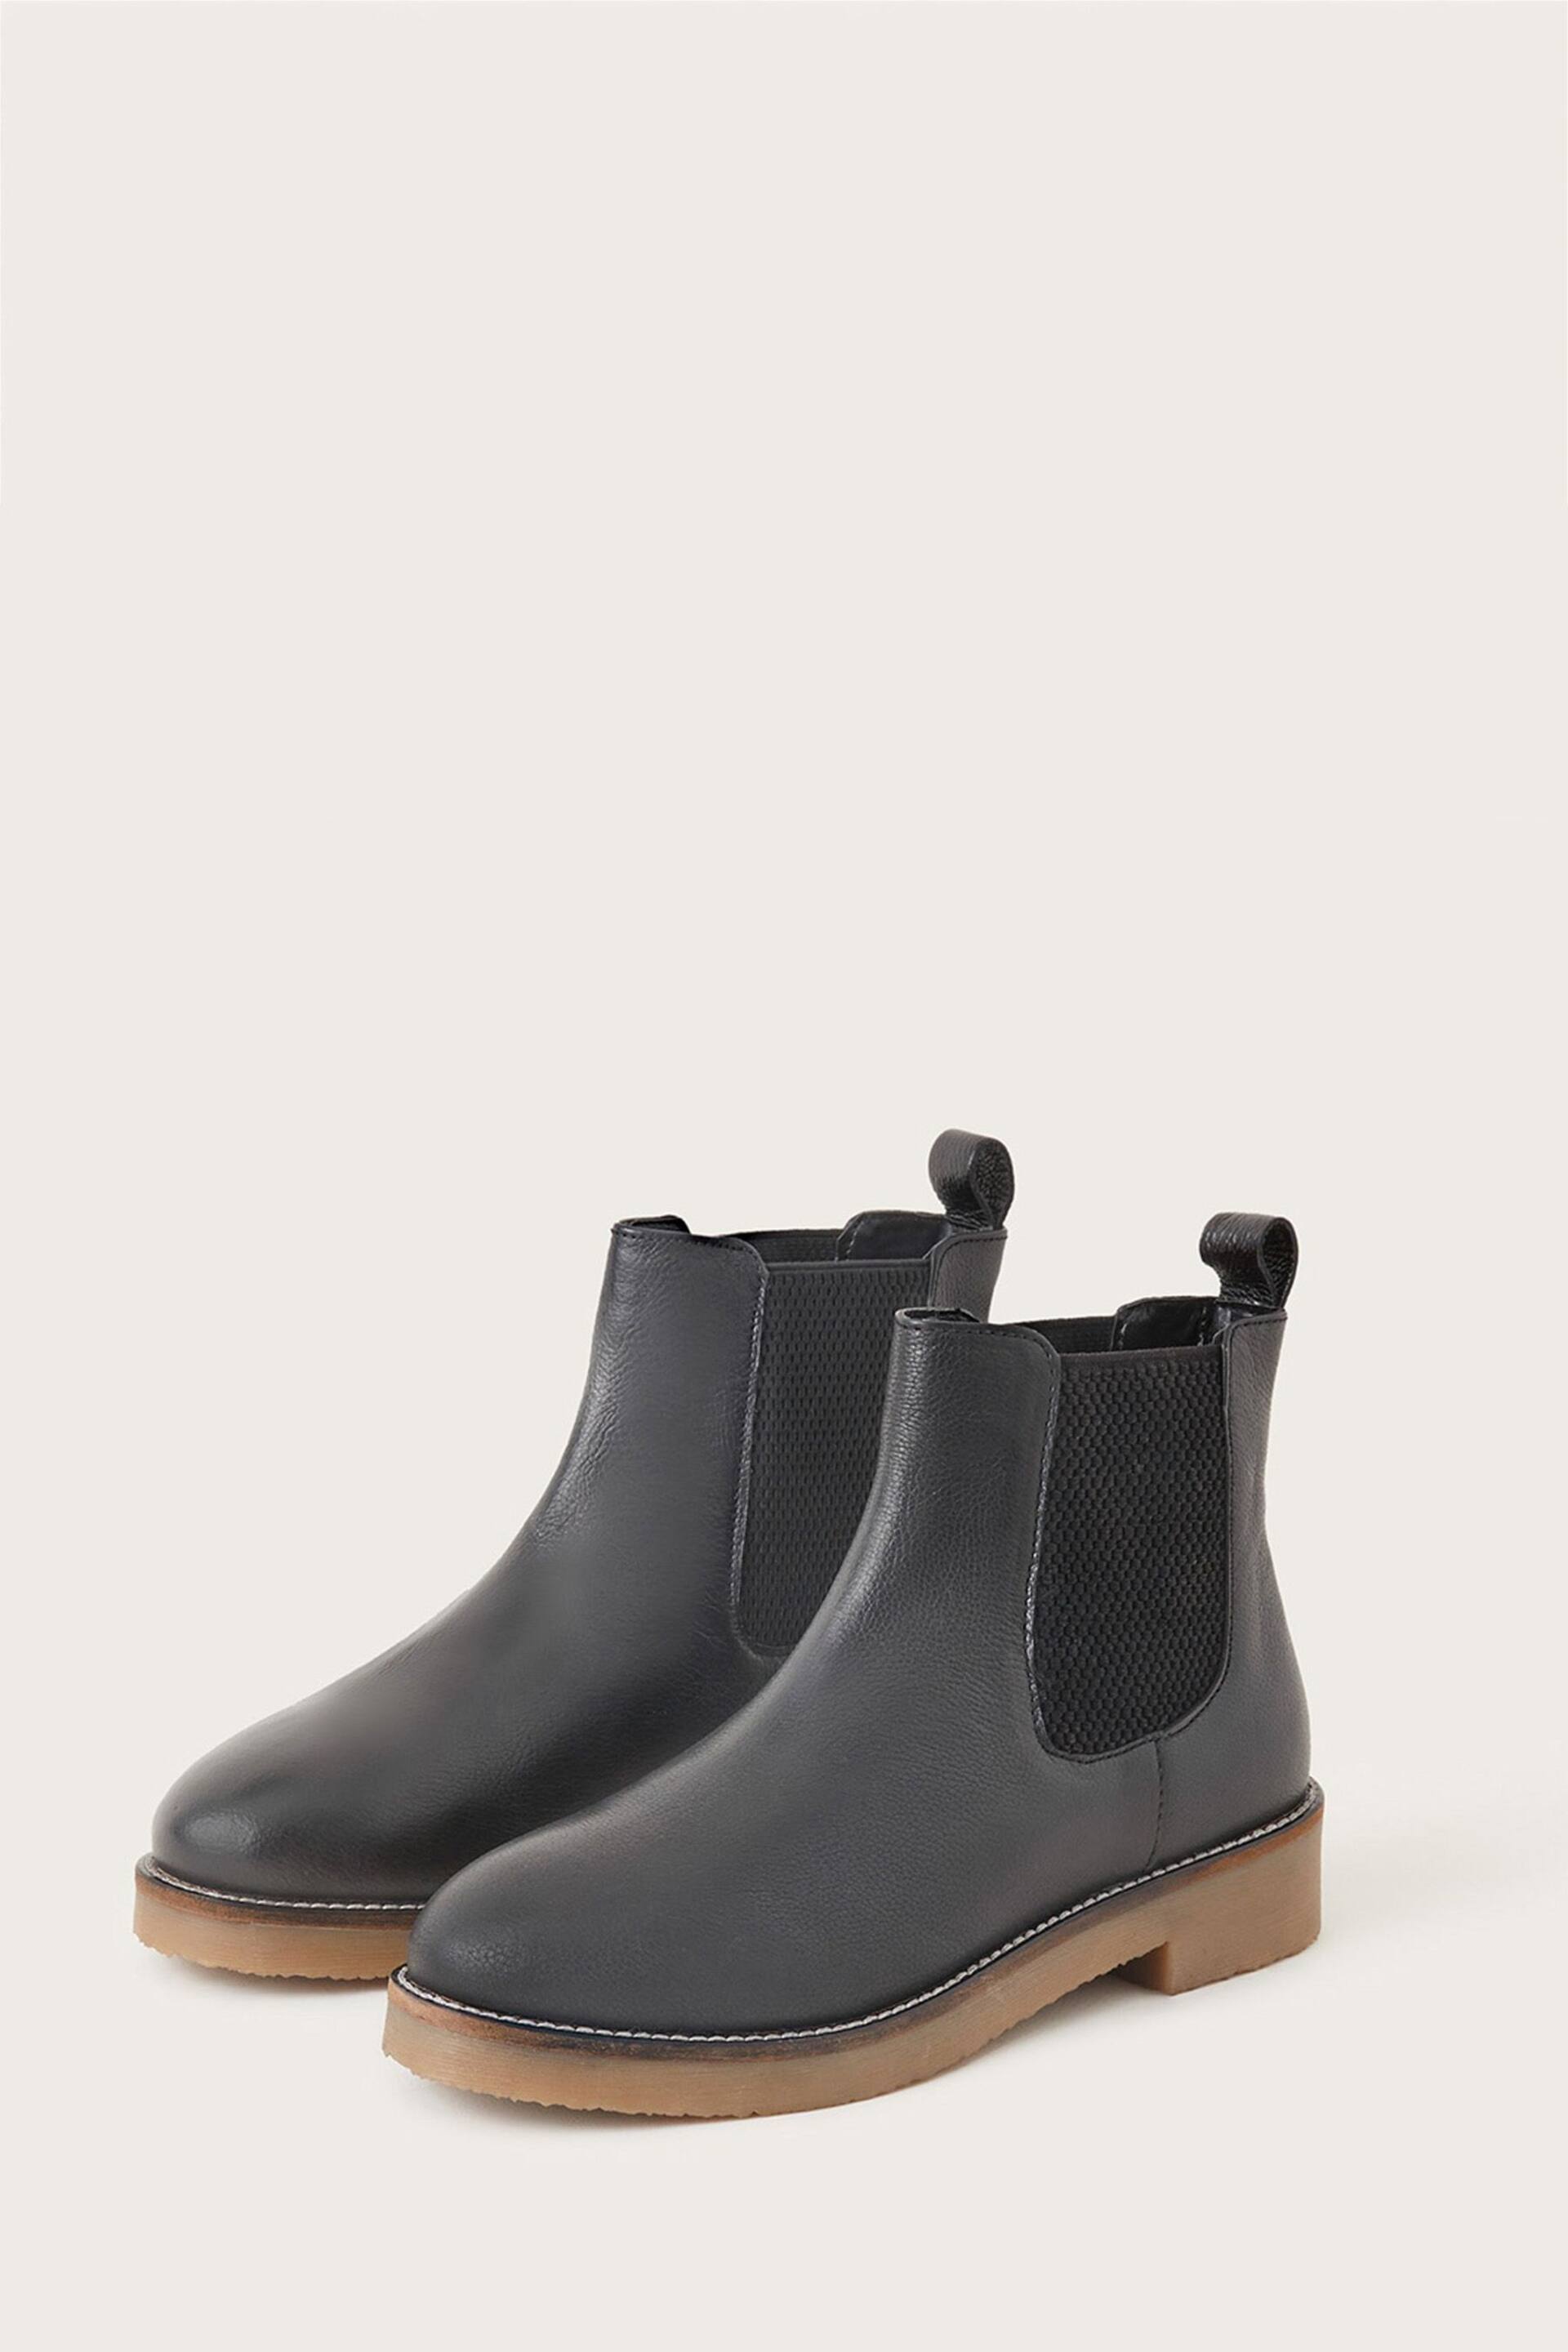 Monsoon Black Leather Chiswick Chelsea Boots - Image 2 of 3